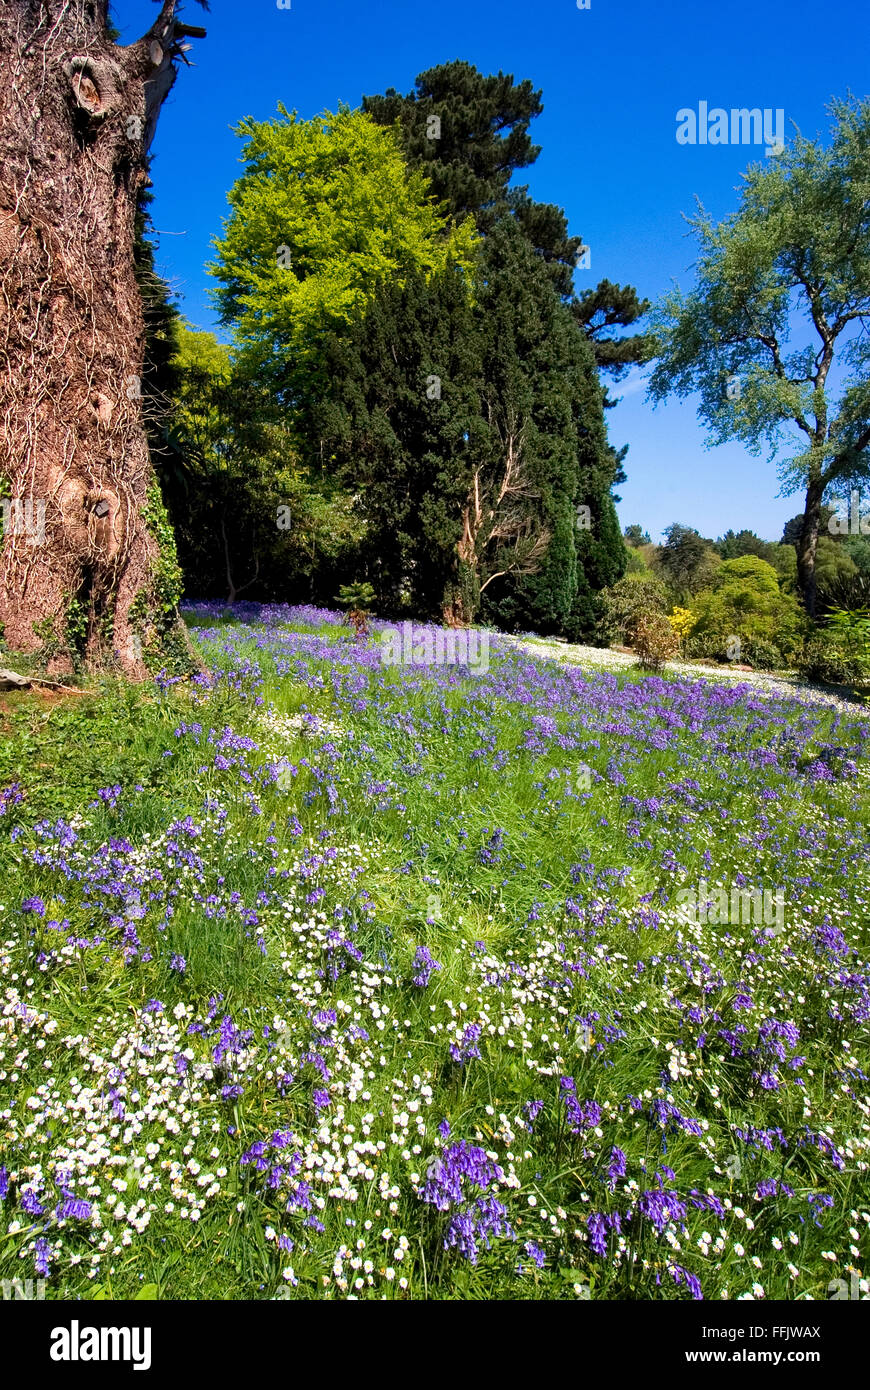 Bluebells and daisies at Mount Stewart, Co. Down, Northern Ireland Stock Photo